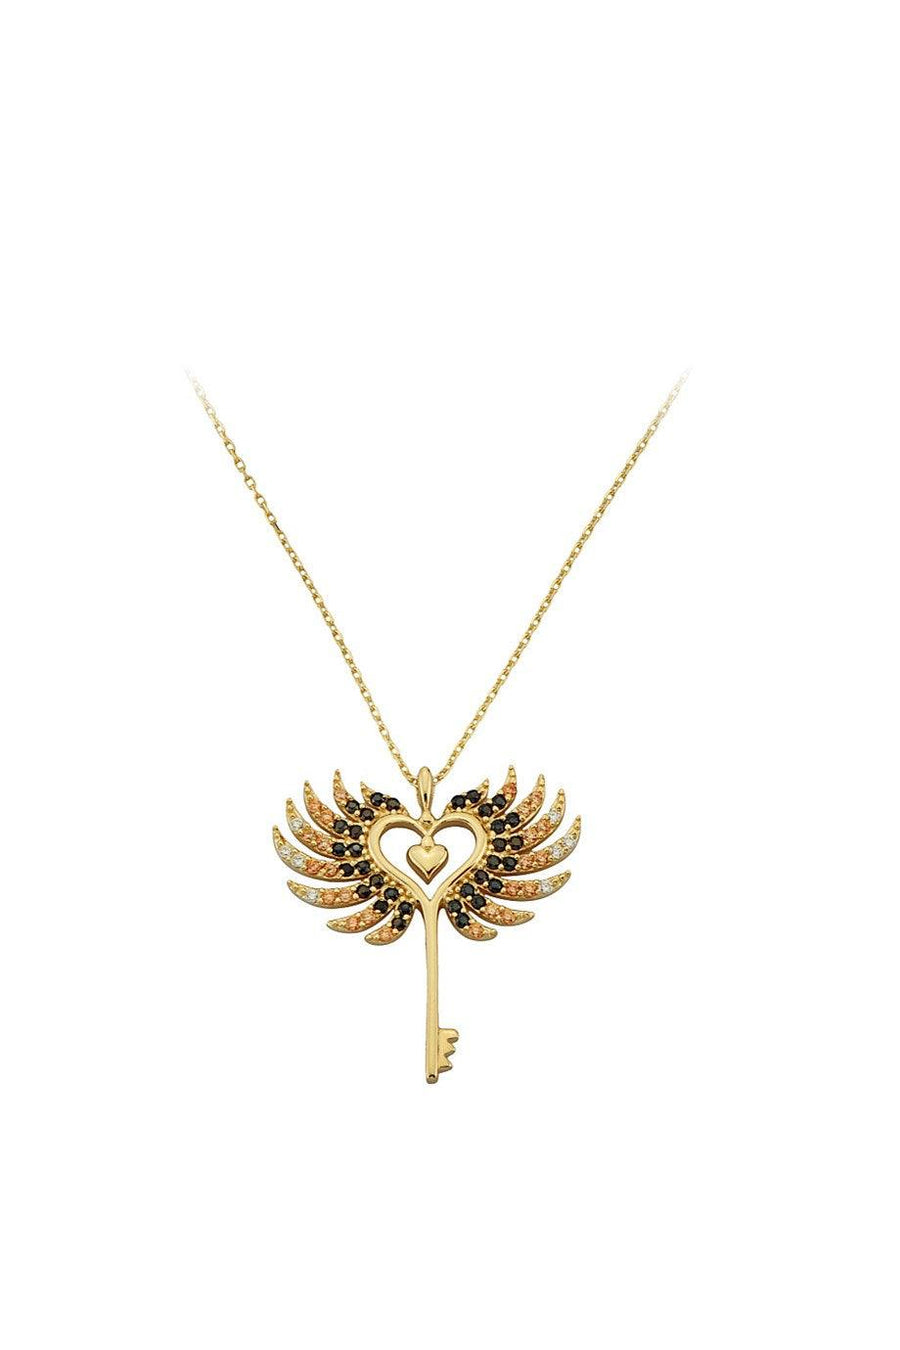 Gold Winged Key Necklace